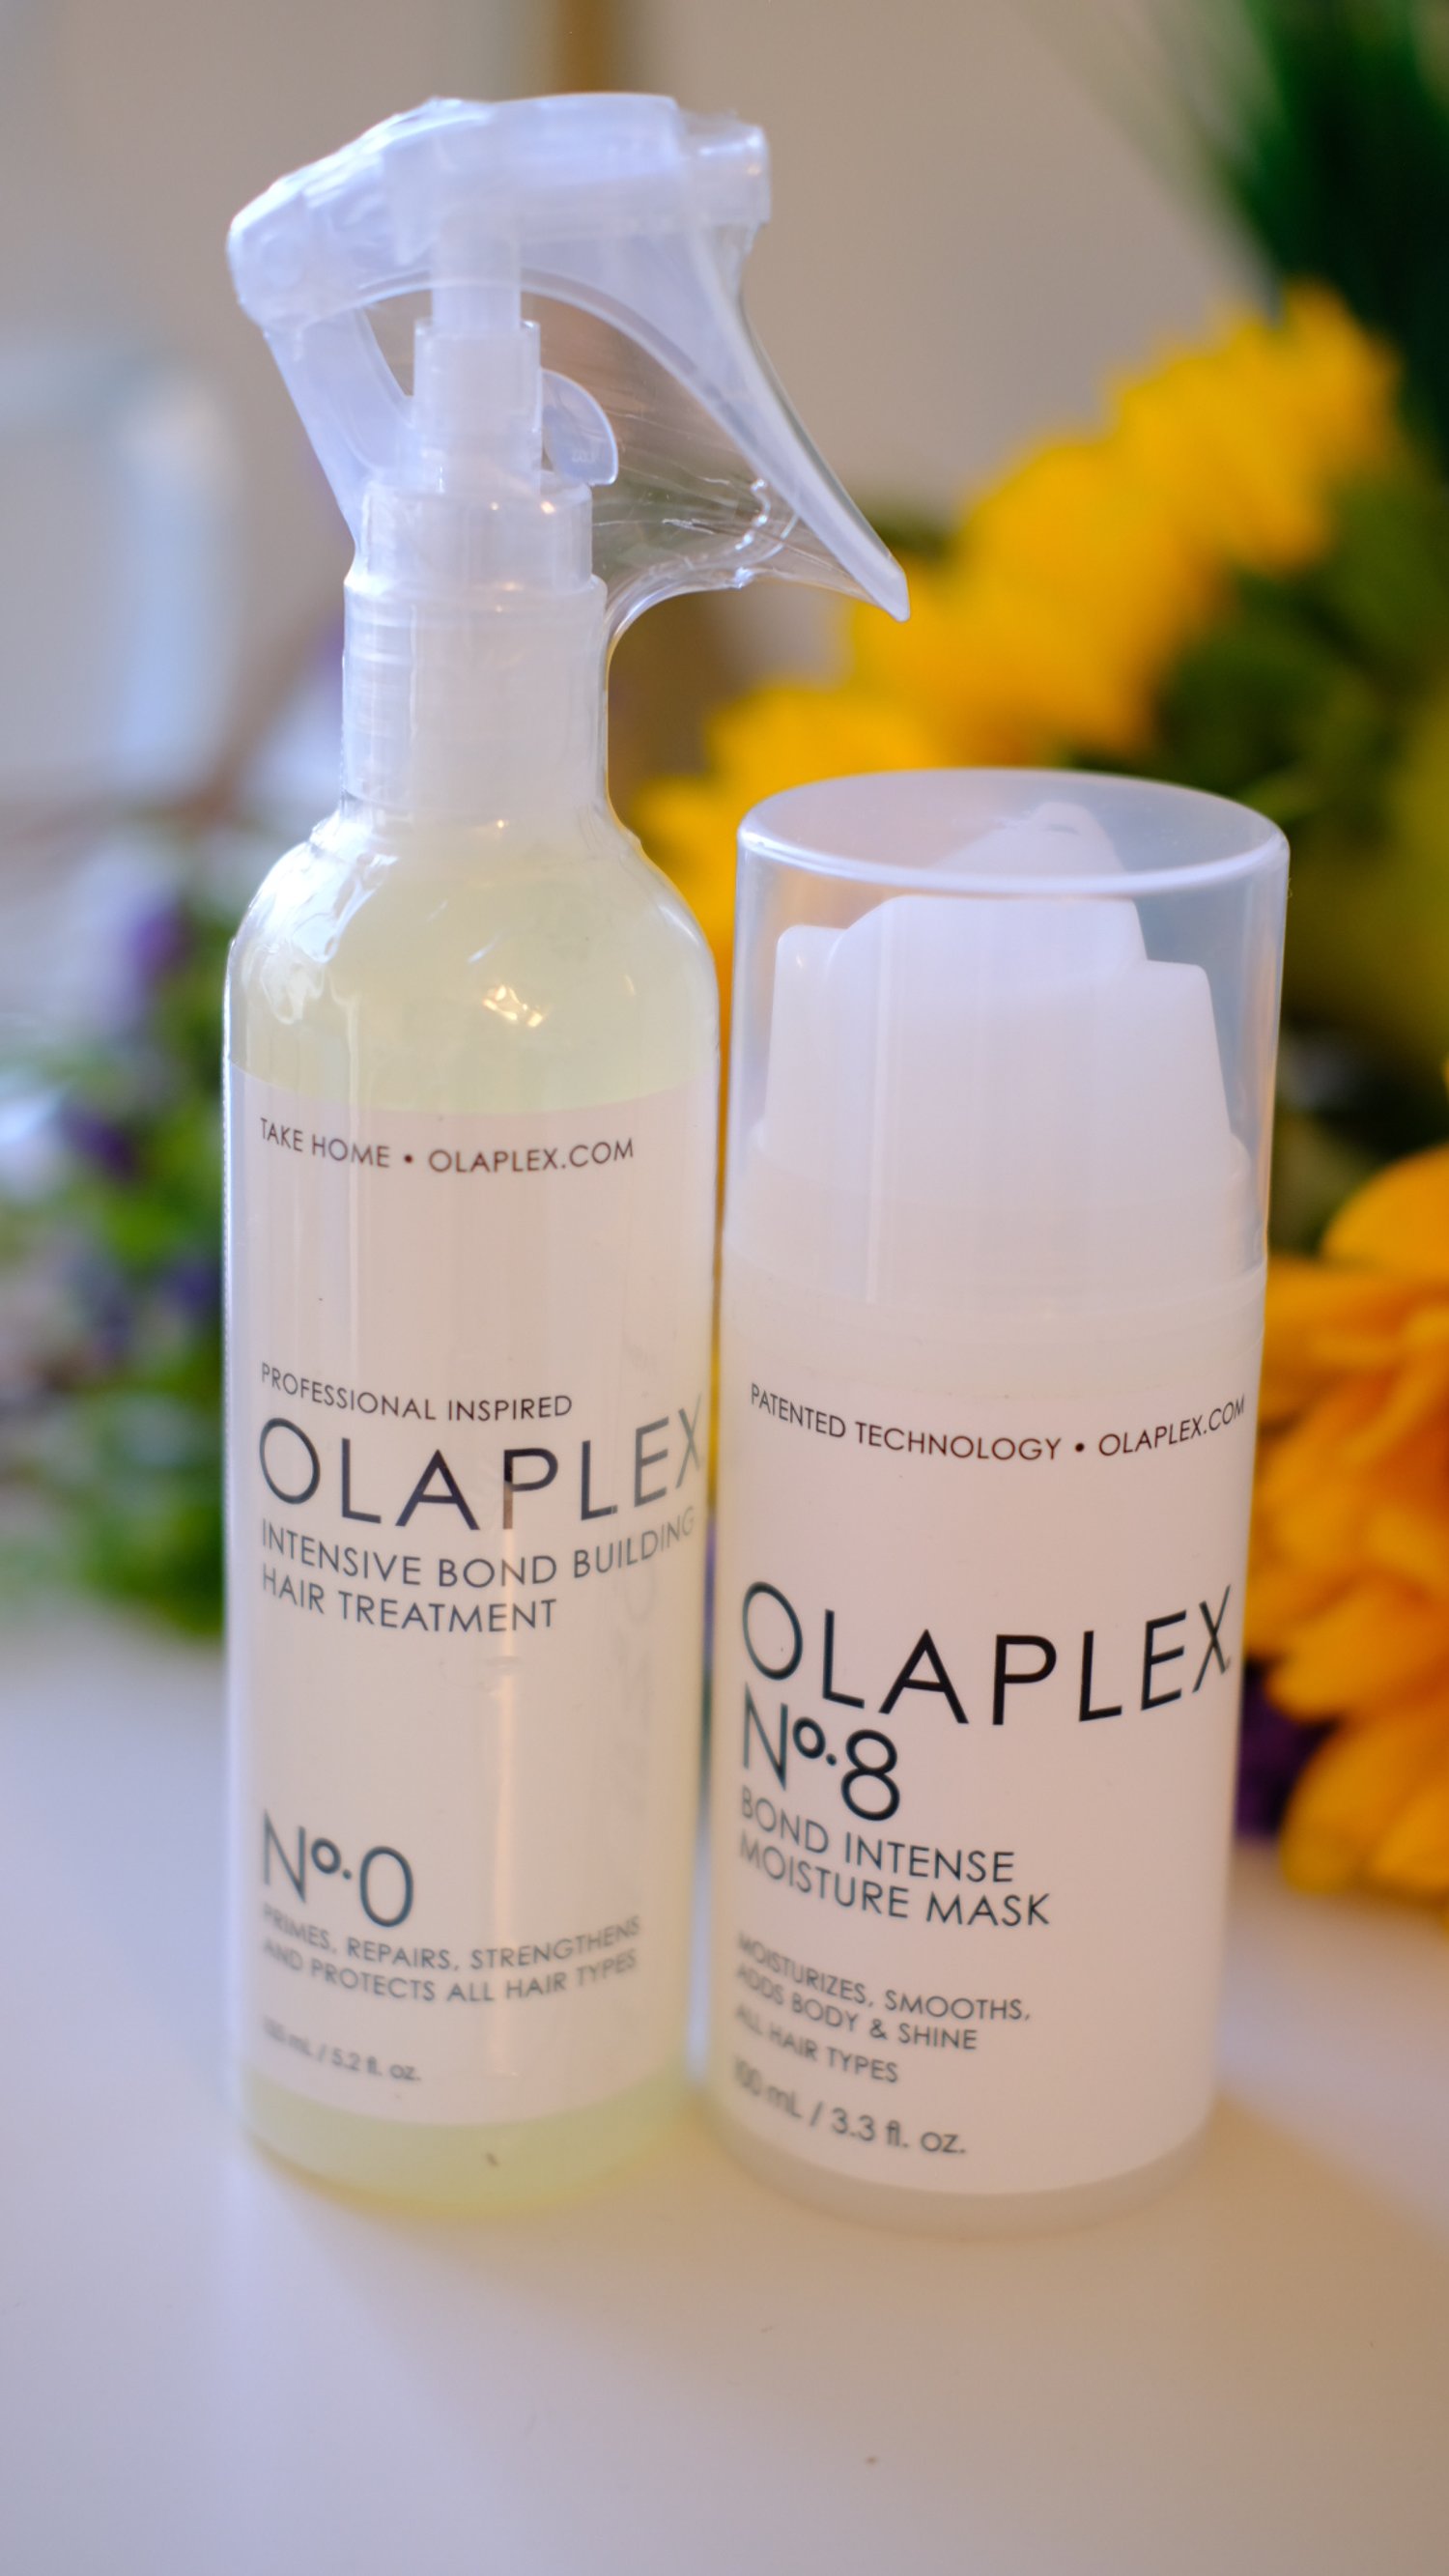 Thanks to a viral Tiktok video, everyone is wondering how to use Olaplex 0, 3 and 8 together. Ready for your best hair days? It is easy to learn how to use Olaplex 8 with 0 and 3 for great results. In this blog post, I’ll show you all the simple step